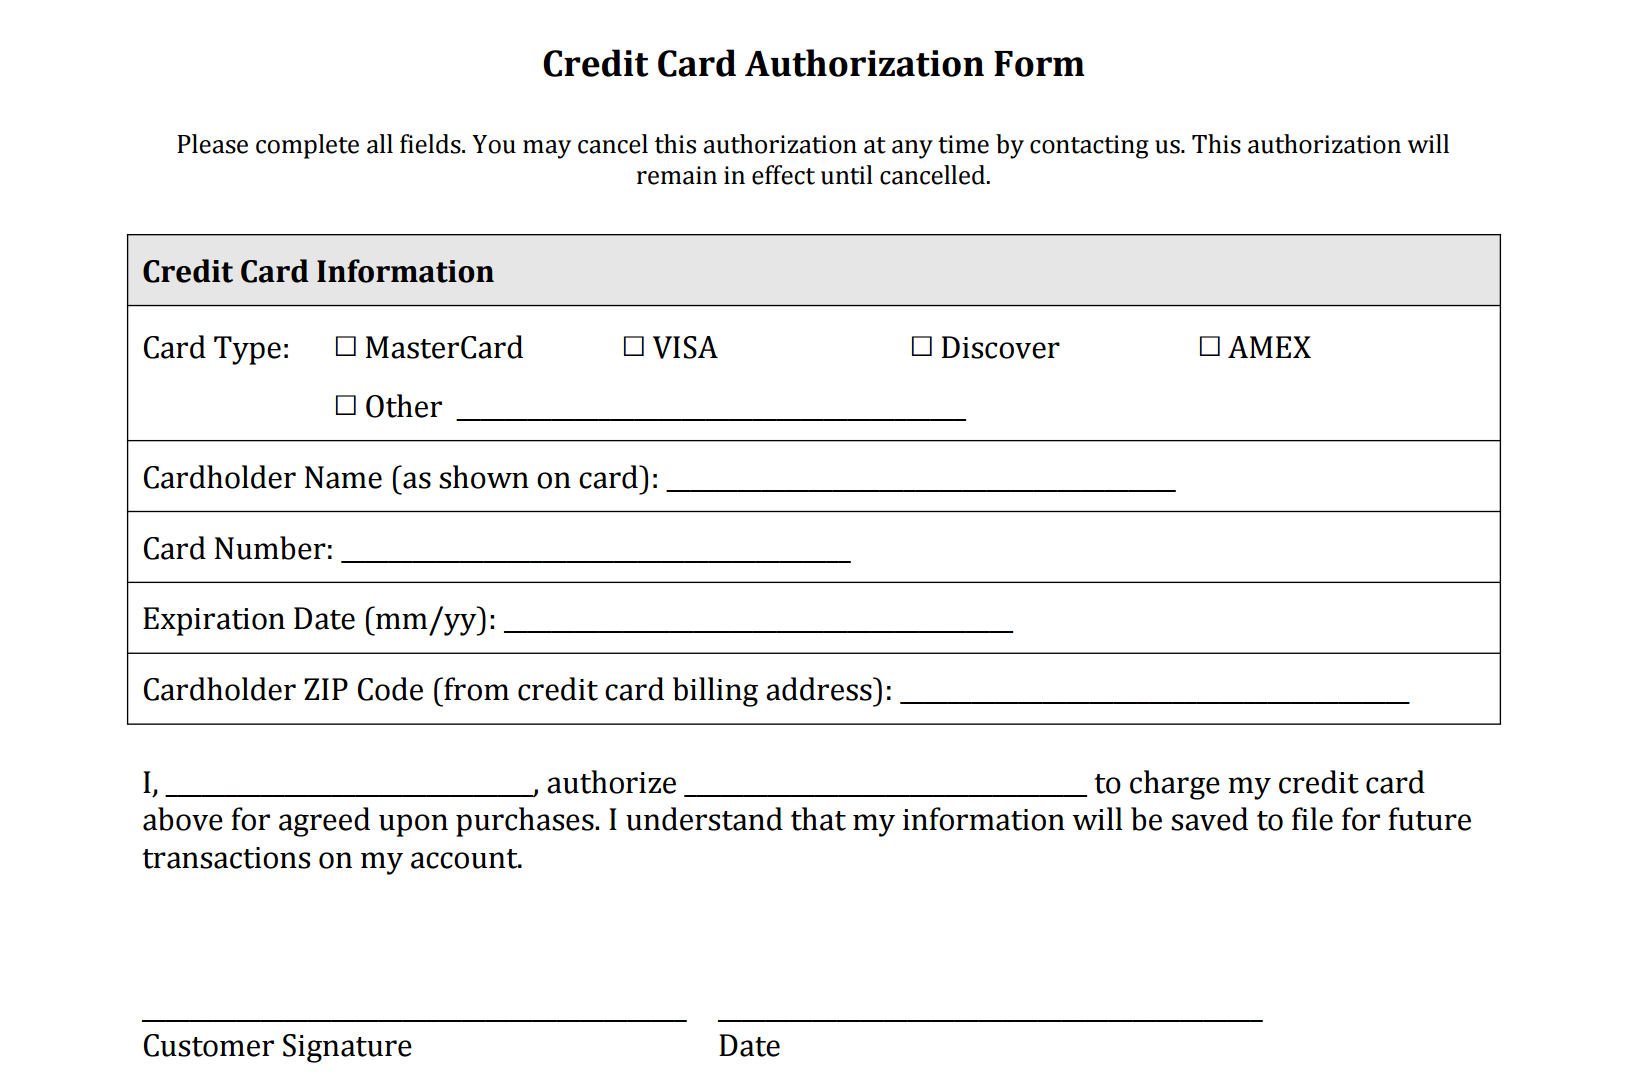 Credit Card Authorization Form Templates [Download]